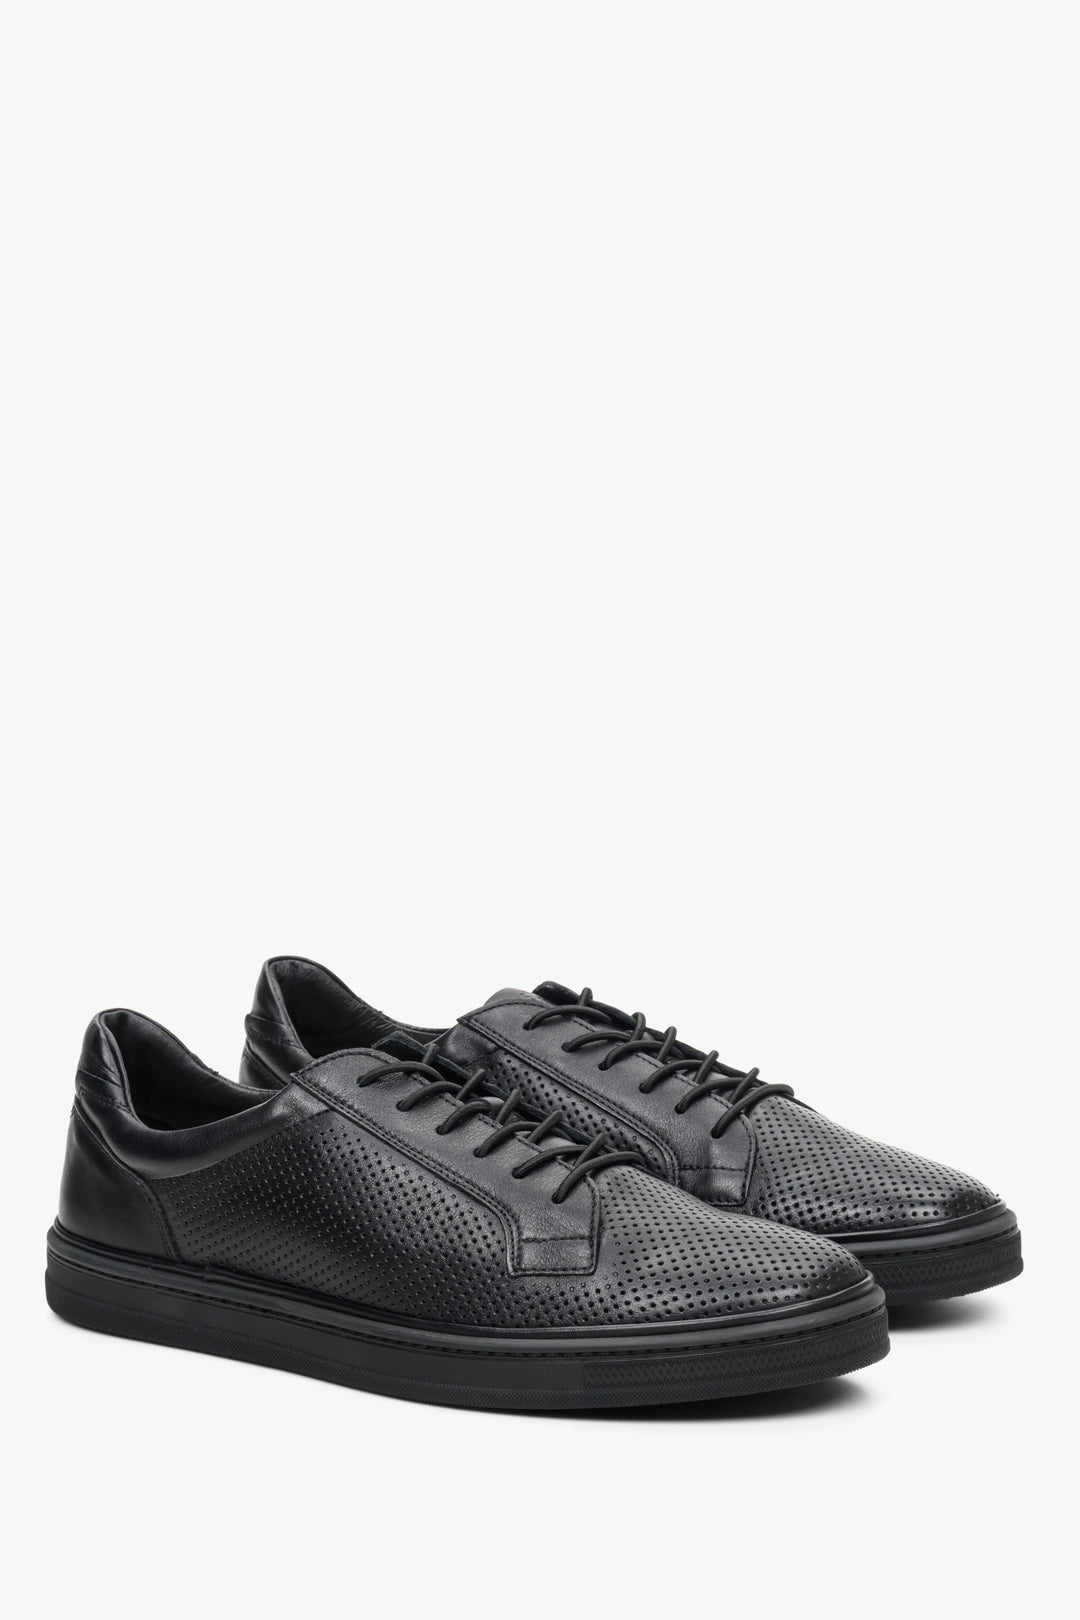 Black Perforated Men's Leather Sneakers for Summer Estro ER00111366